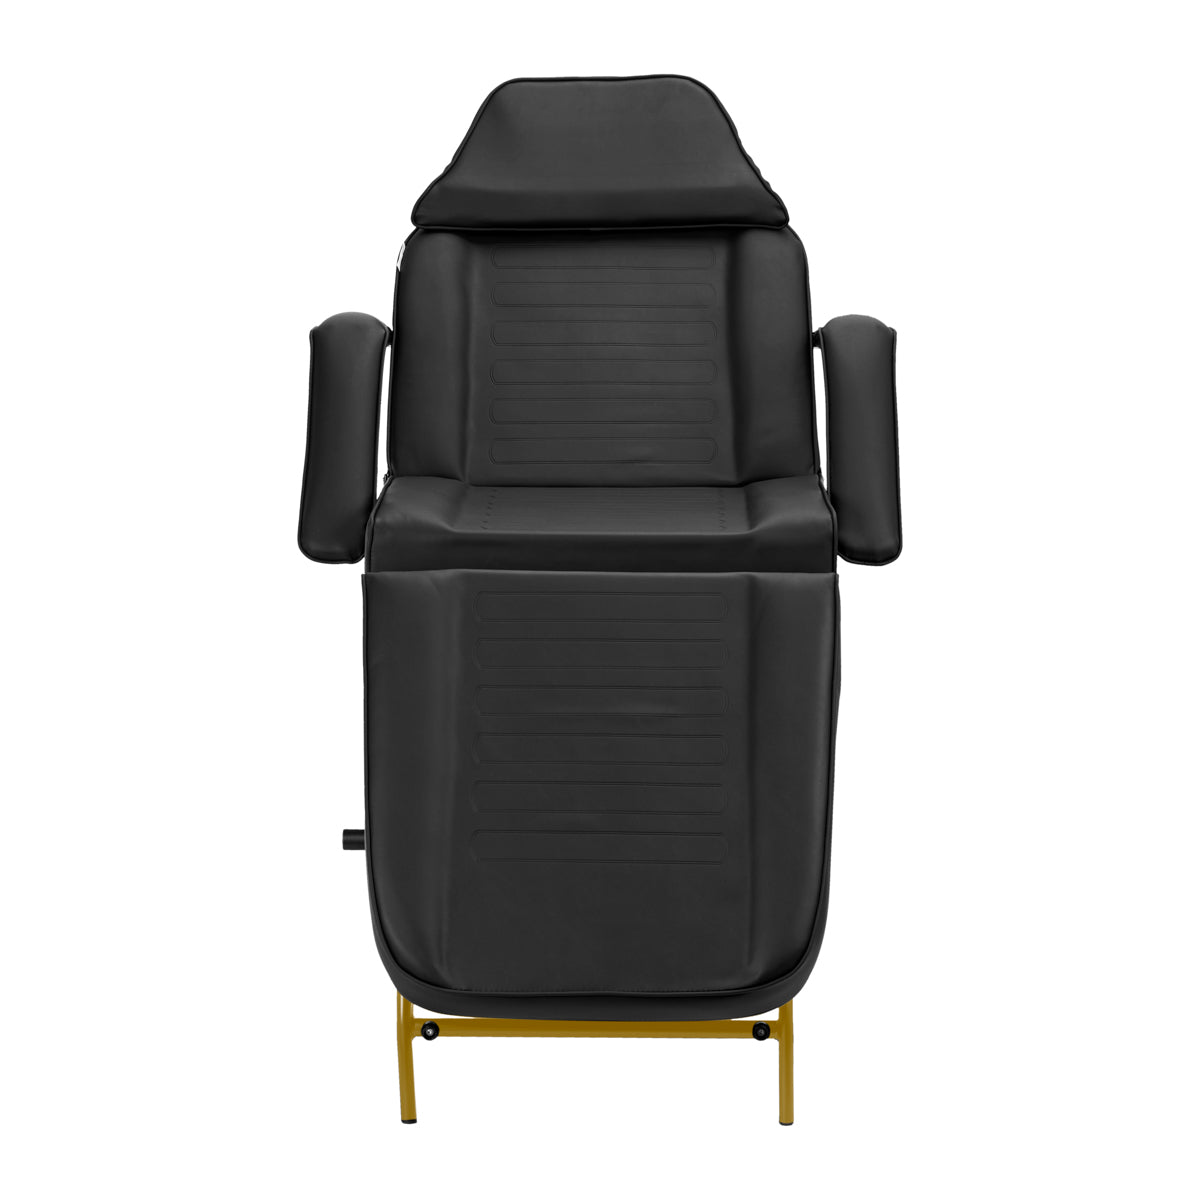 ActiveShop Cosmetic Chair 557G with Cuvettes Black